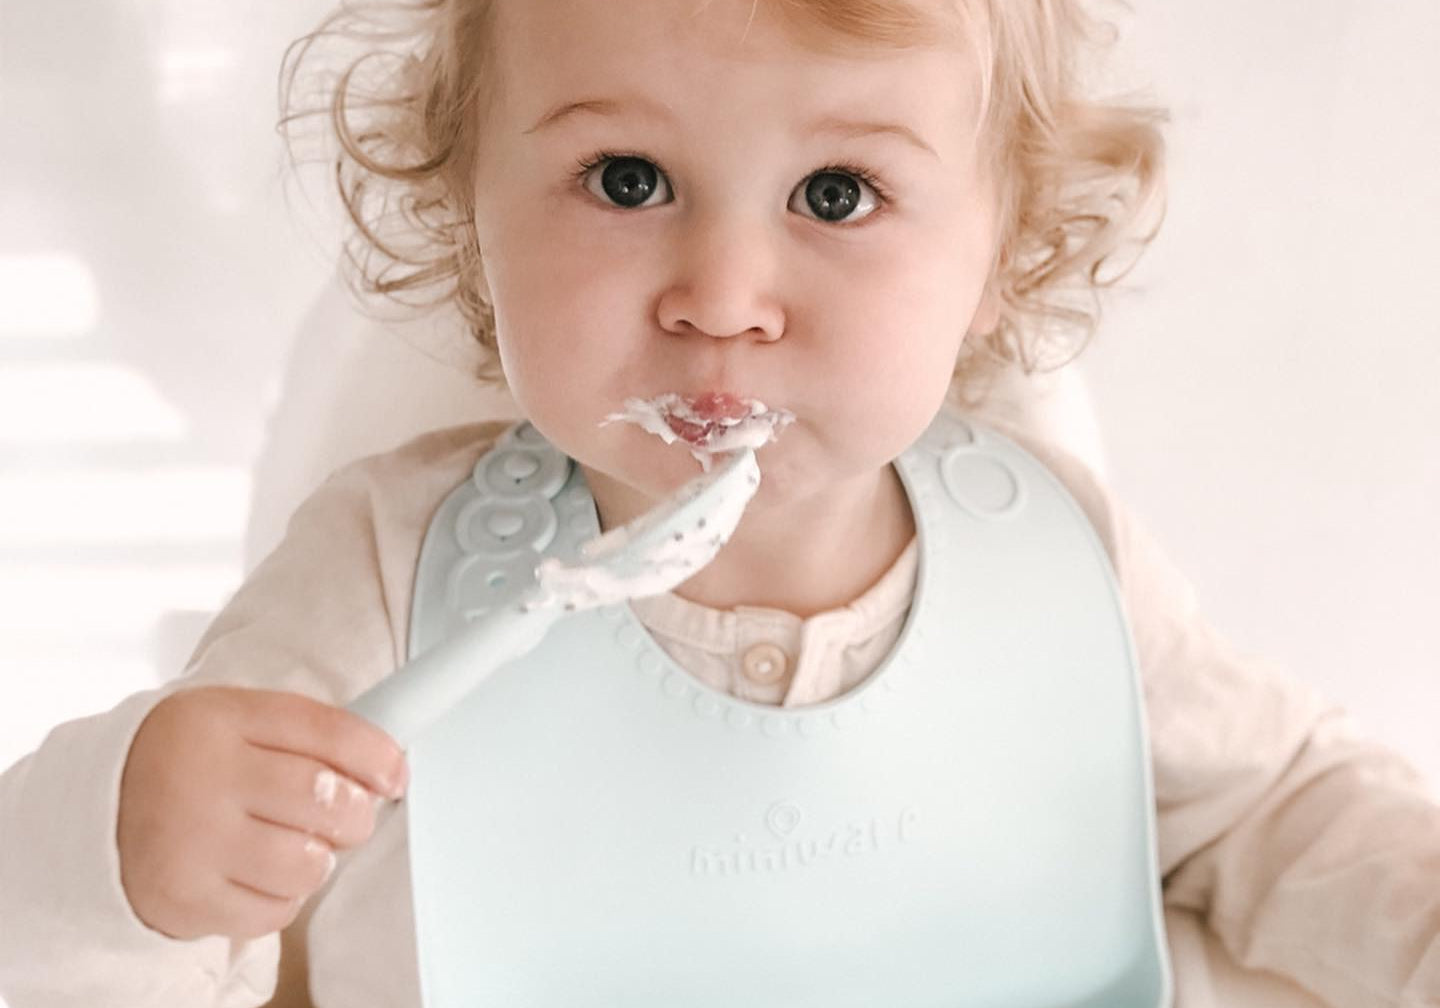 Miniware’s Roll & Lock silicone Bib Takes (Some) of the Mess Out of Self-Feeding Training